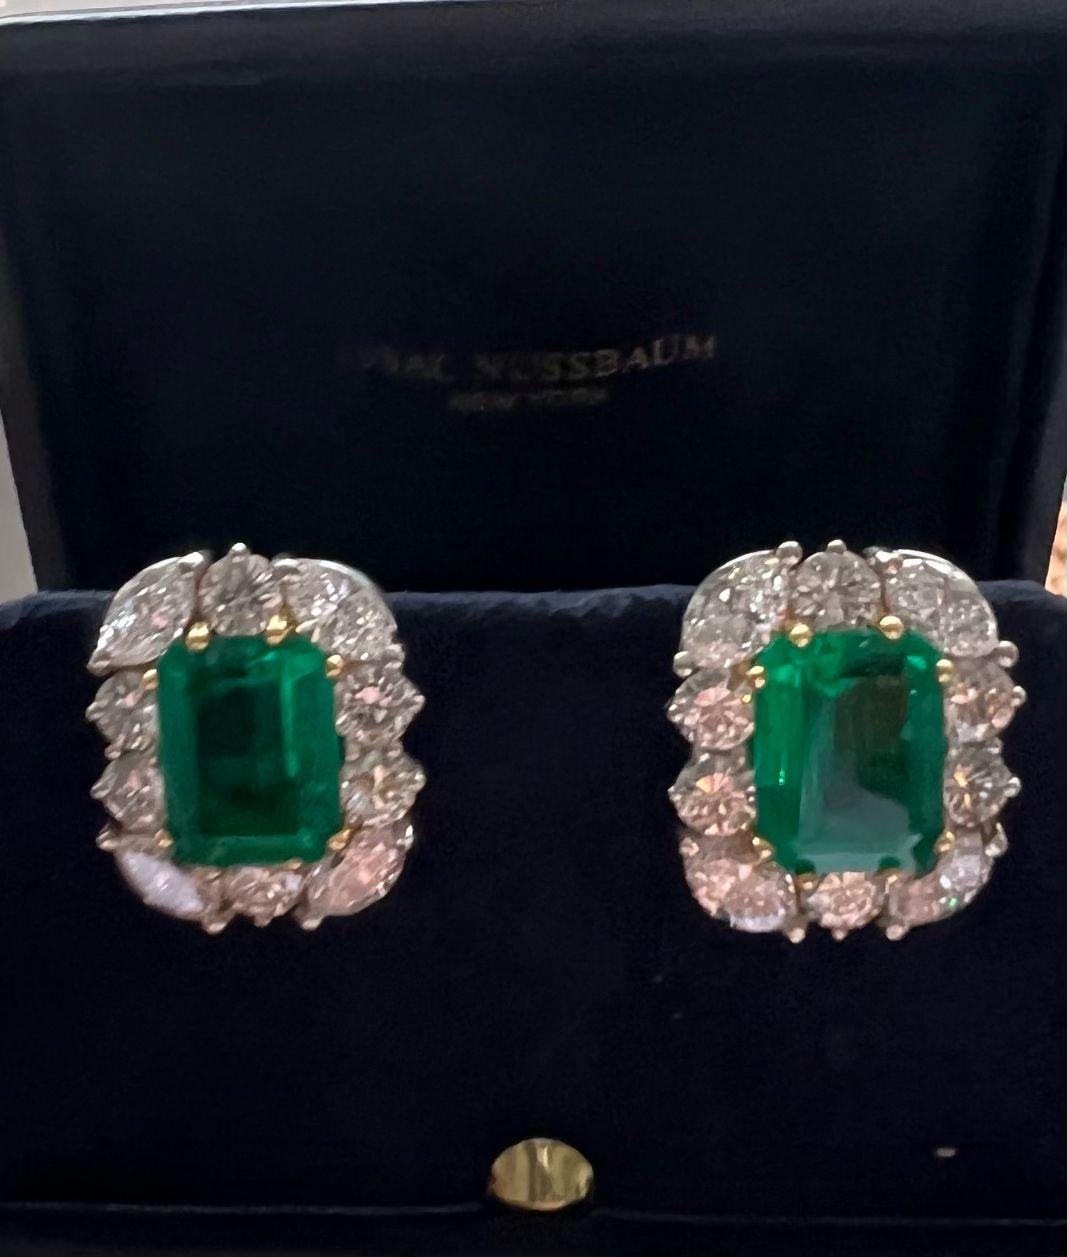 Green Emerald Gem Earrings. 
An incredible estate pair of Ear-Clips from a bygone era.
This sophisticated pair of earrings are set with two of the most amazing matching old mine emeralds. Displaying a deep clear pure green color  (no hint of blue